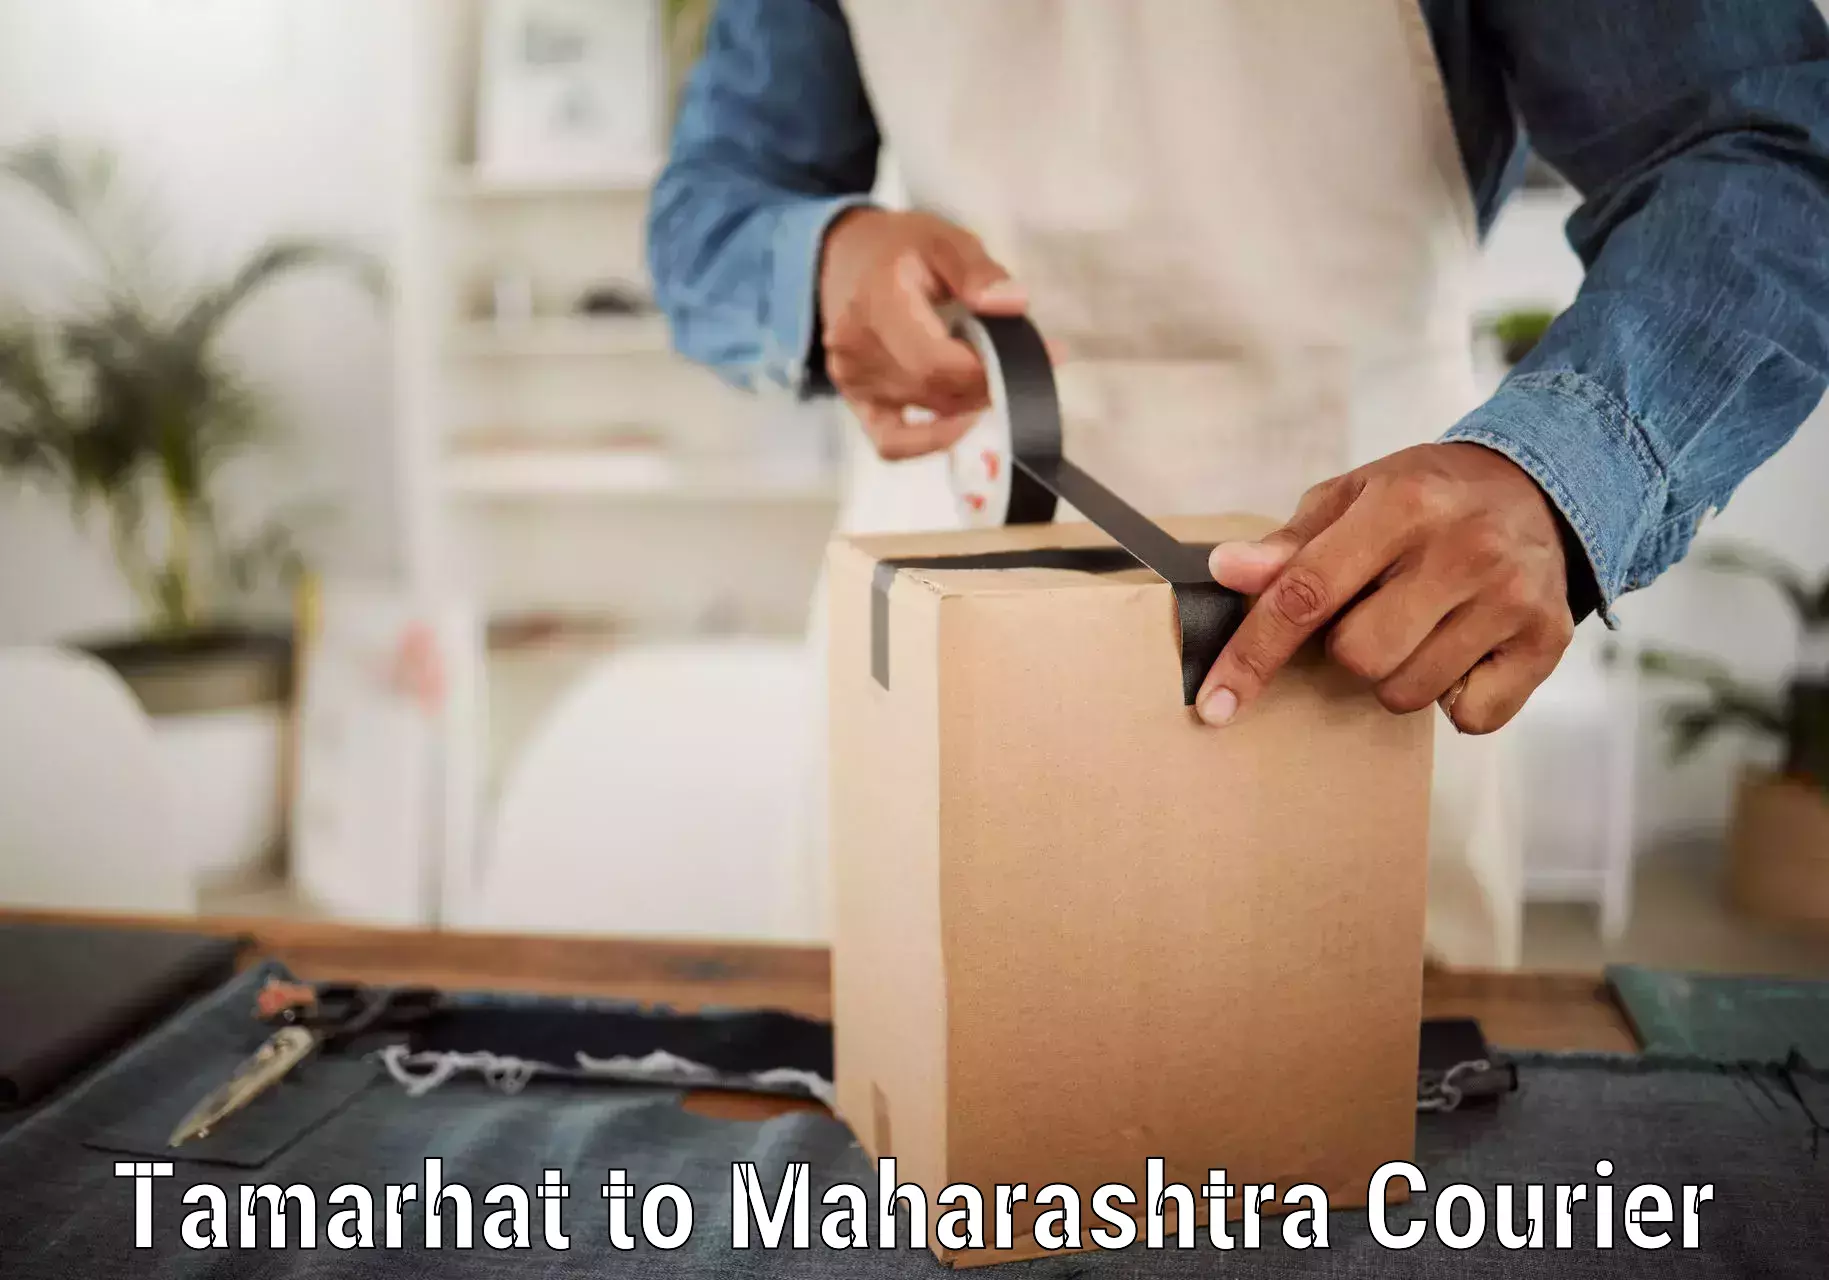 Automated parcel services Tamarhat to Andheri